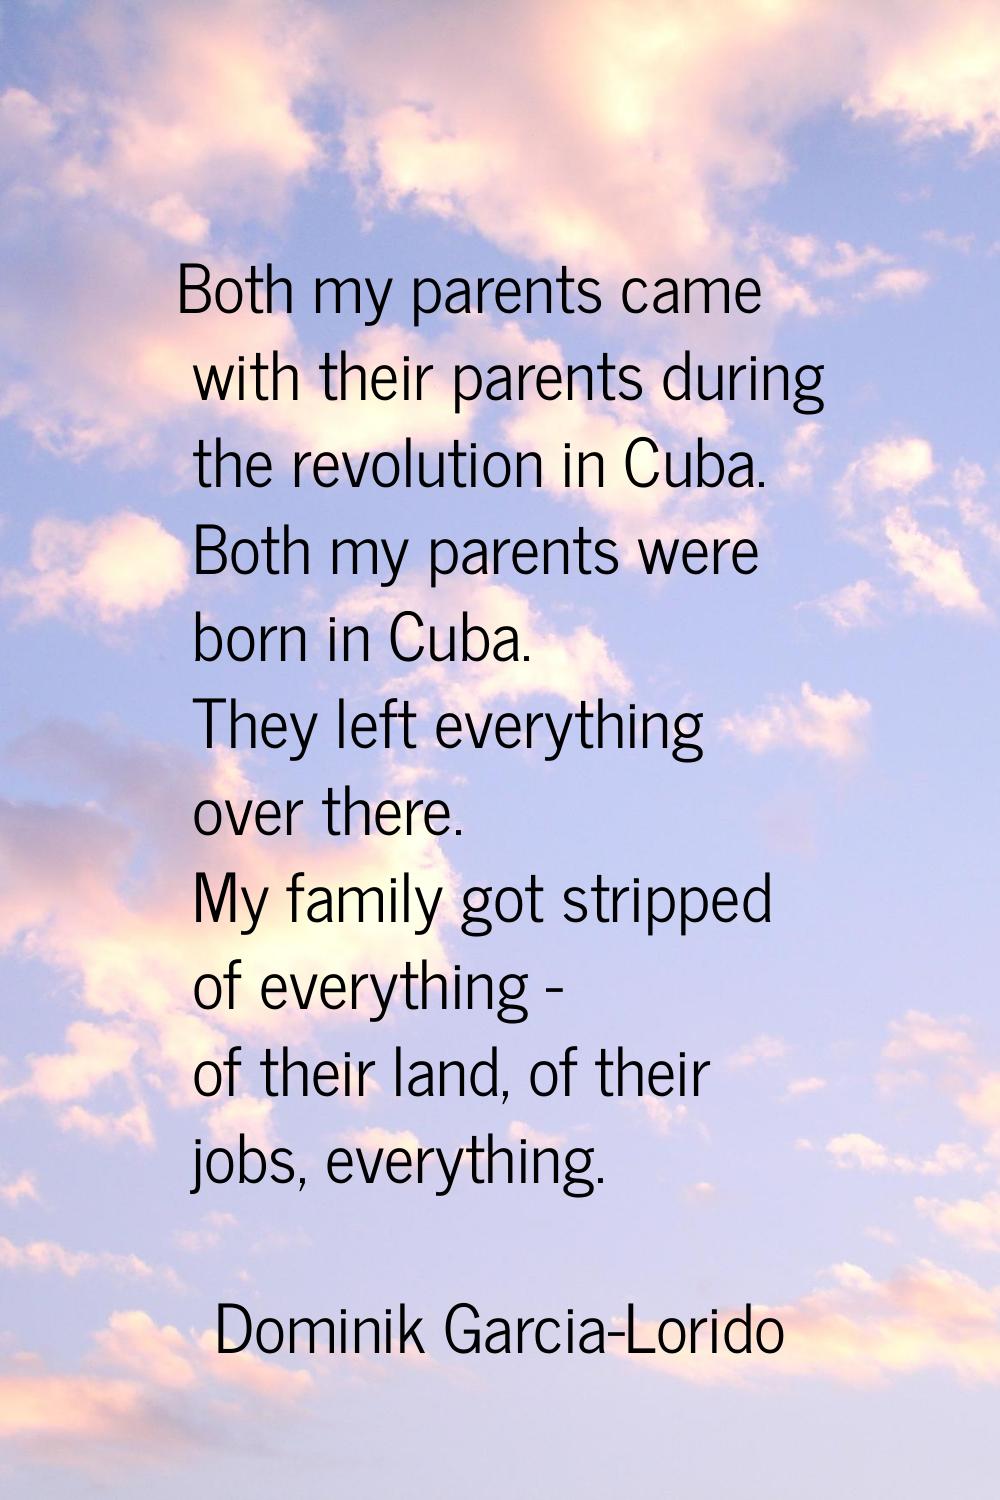 Both my parents came with their parents during the revolution in Cuba. Both my parents were born in